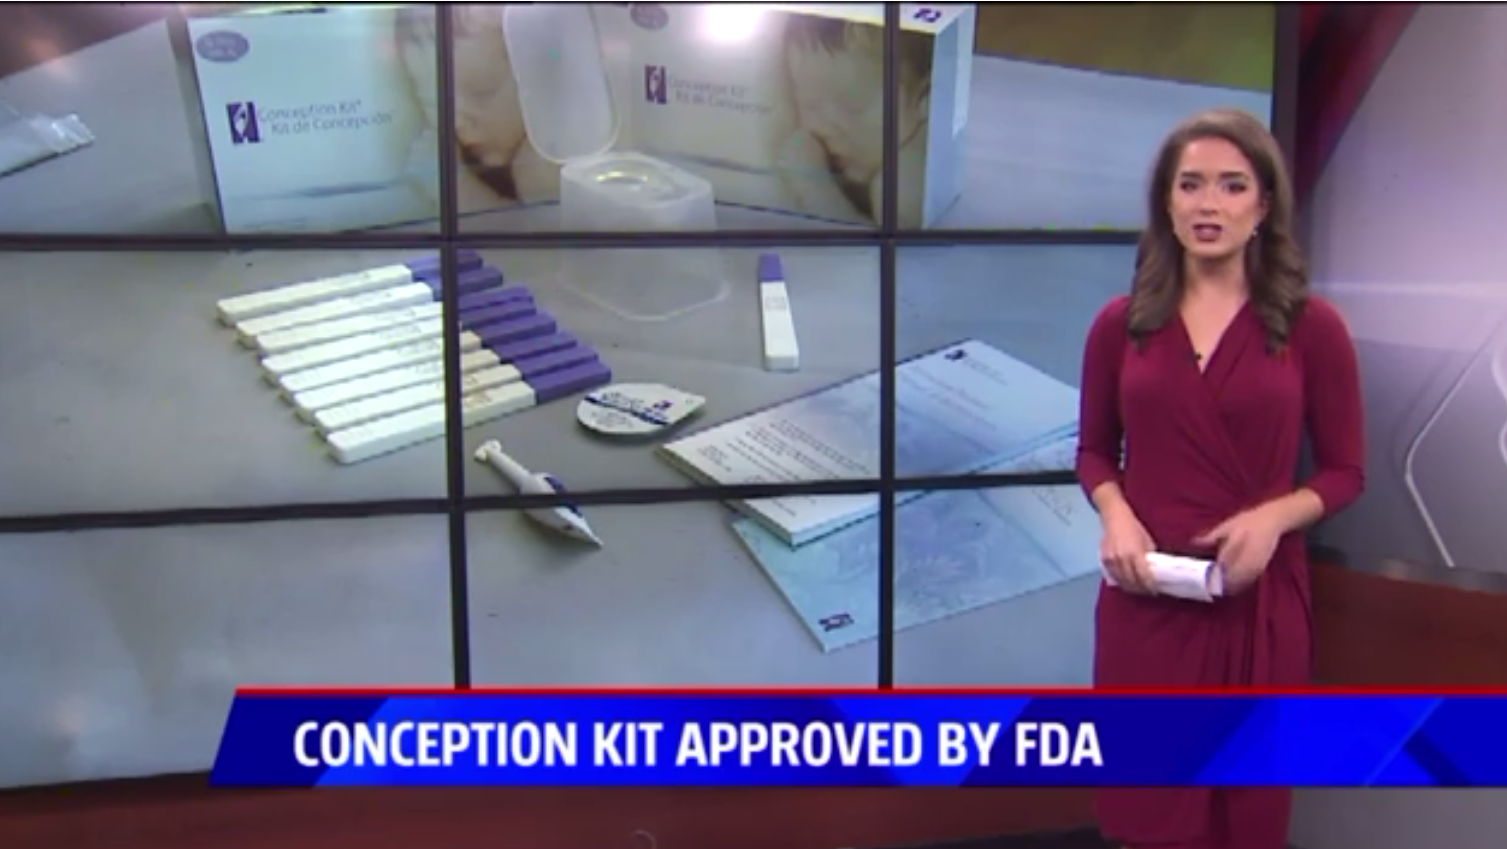 Fda Approved Take Home Kit Helps Couples Conceive Conception Kit